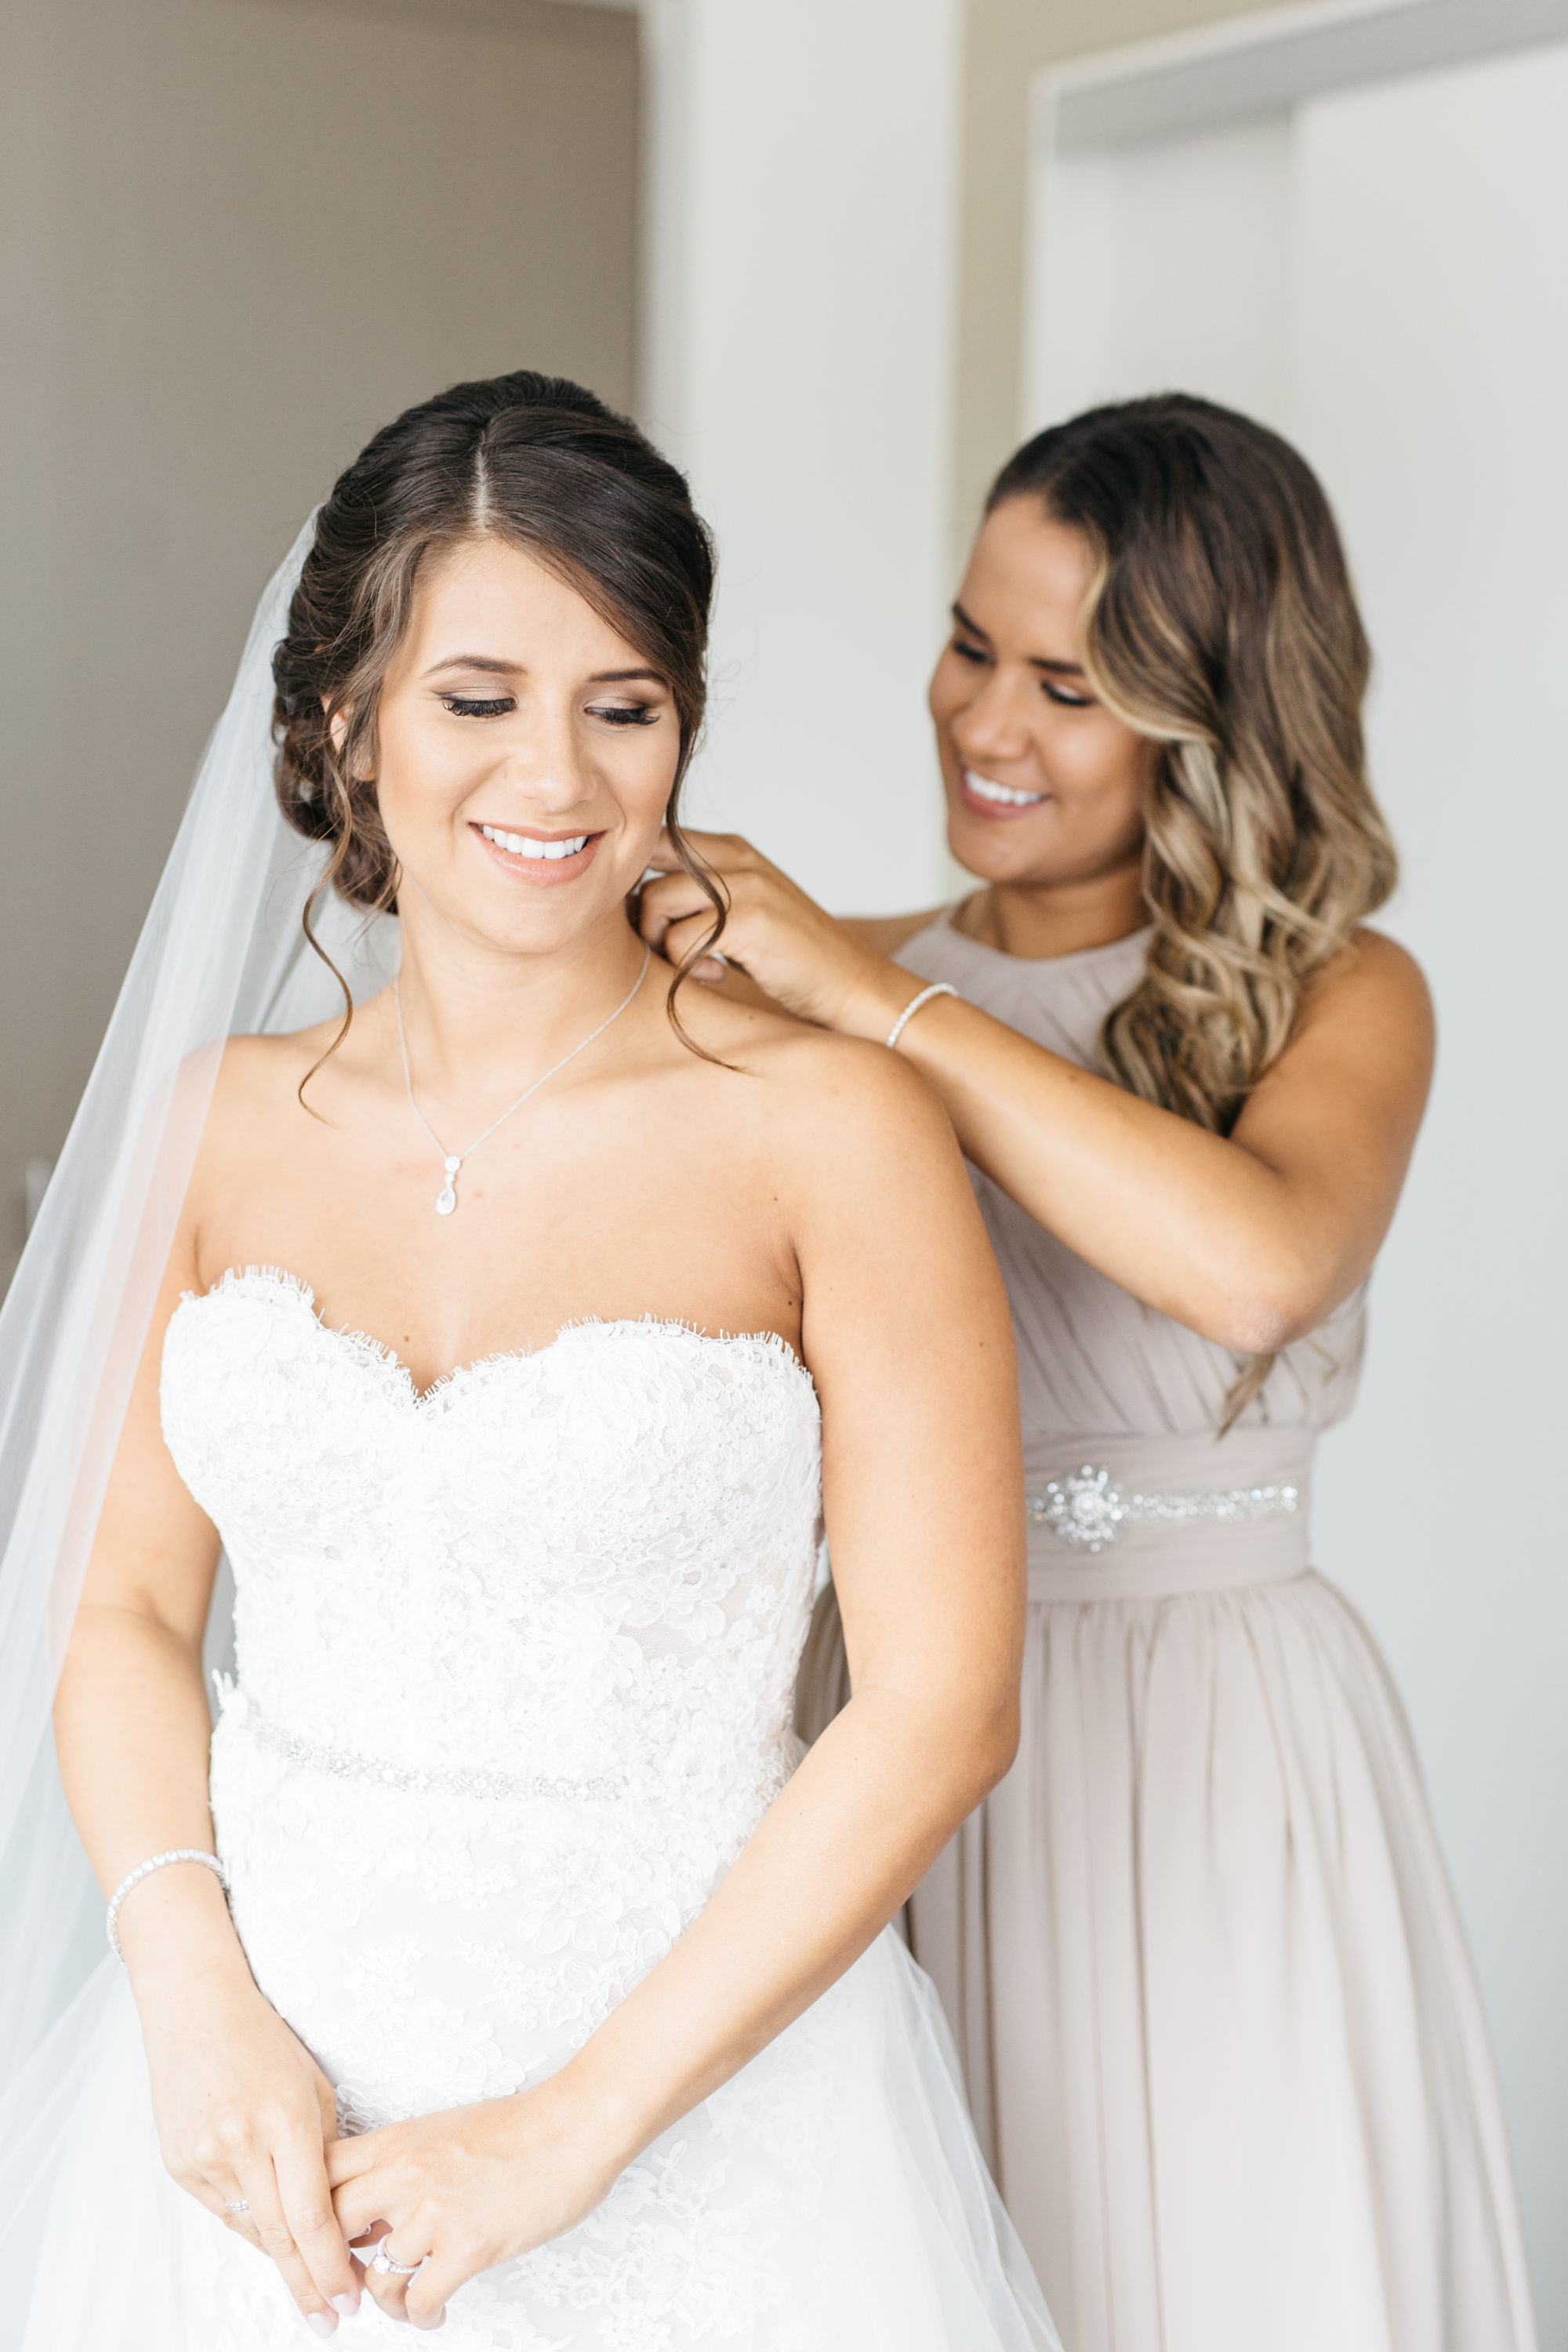 Maid of honour helping bride with jewelry